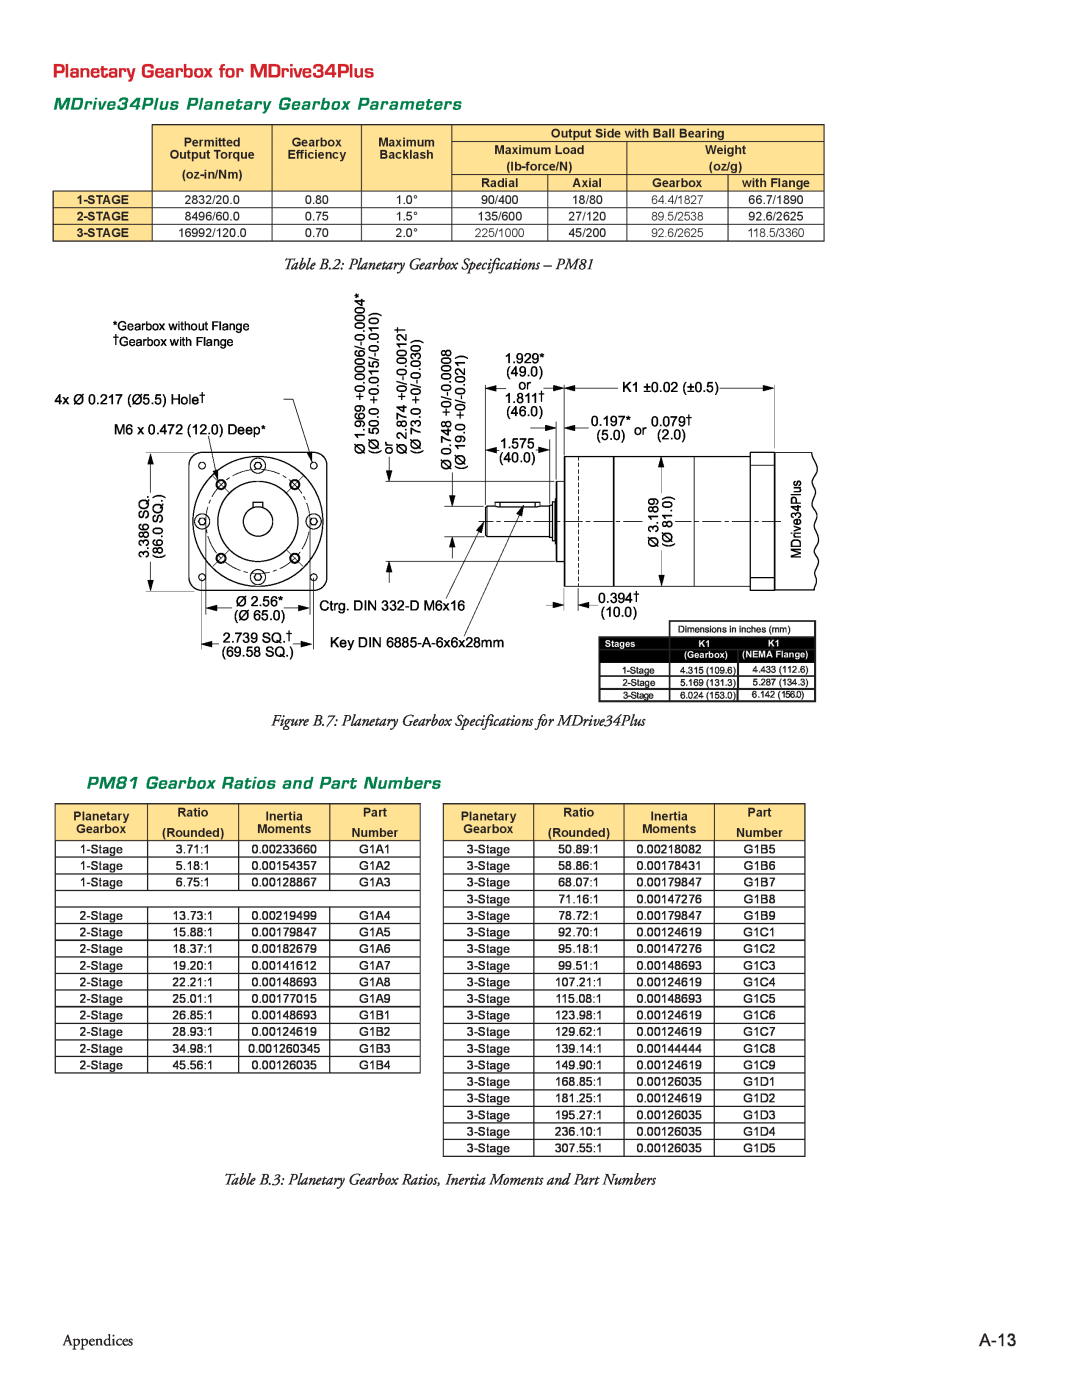 Intelligent Motion Systems manual Planetary Gearbox for MDrive34Plus, A-13, MDrive34Plus Planetary Gearbox Parameters 